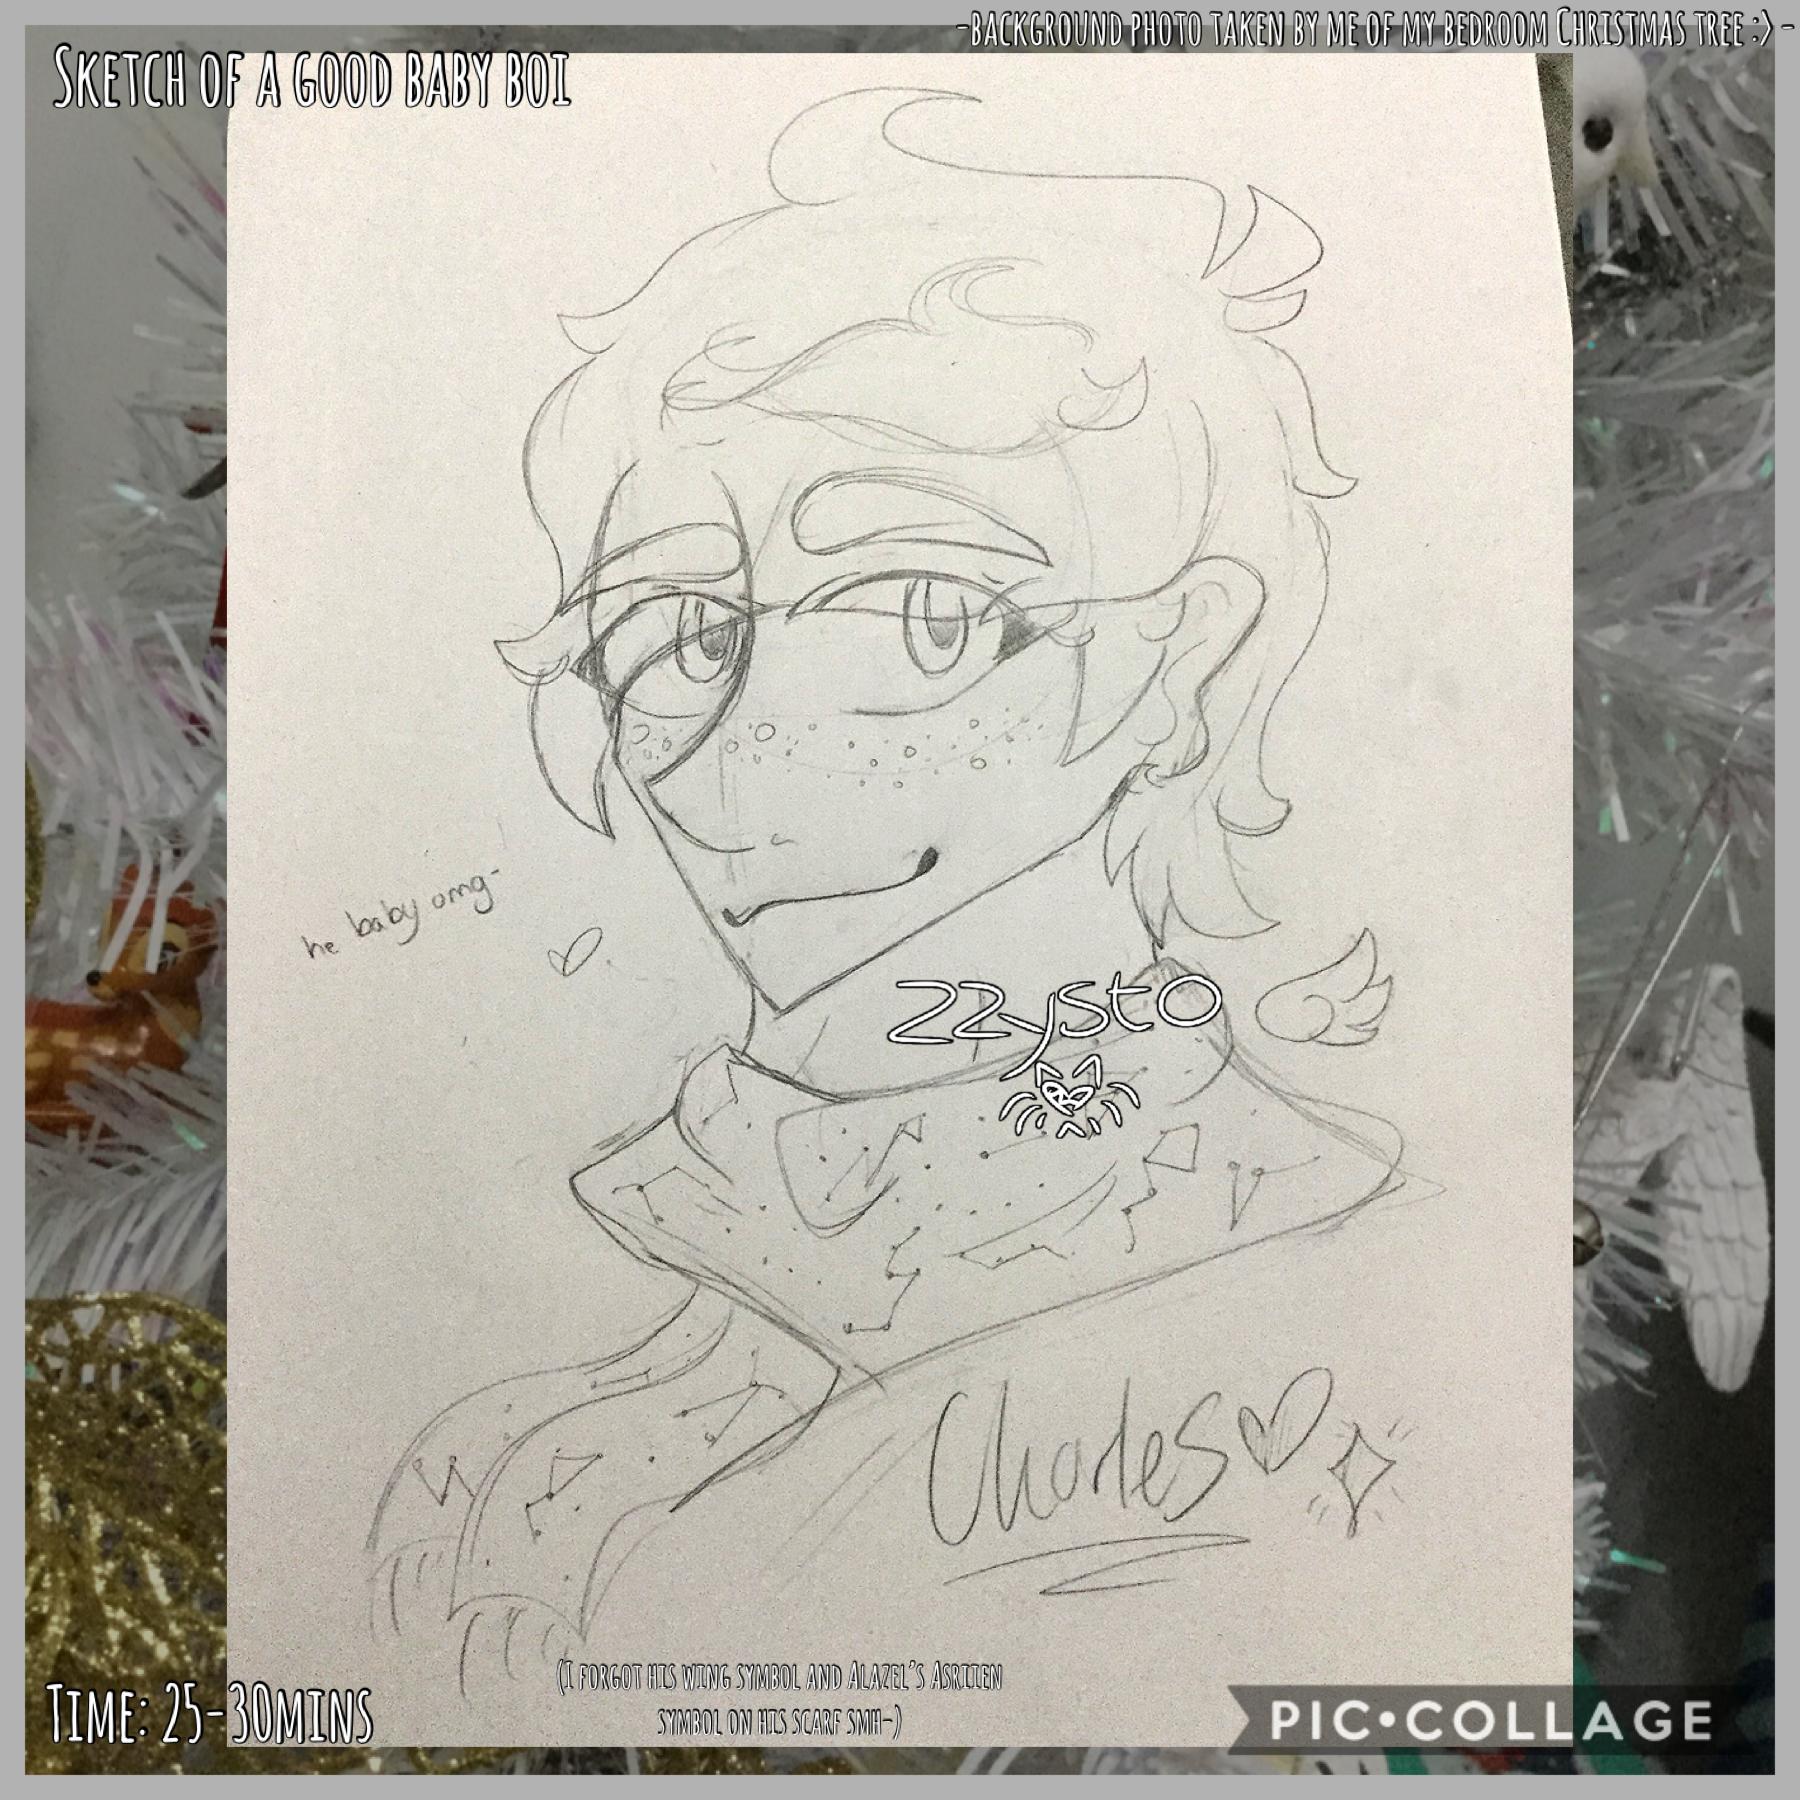 🎄Tap🎄
Merry Christmas Eve y’all!! 
Here’s a sketchy Charles because I haven’t had time or been able to draw anything else Christmassy recently and drawing him just makes me really happy :3
dUdes it’s Christmas Day tomorrow like what the hEcc time has gone